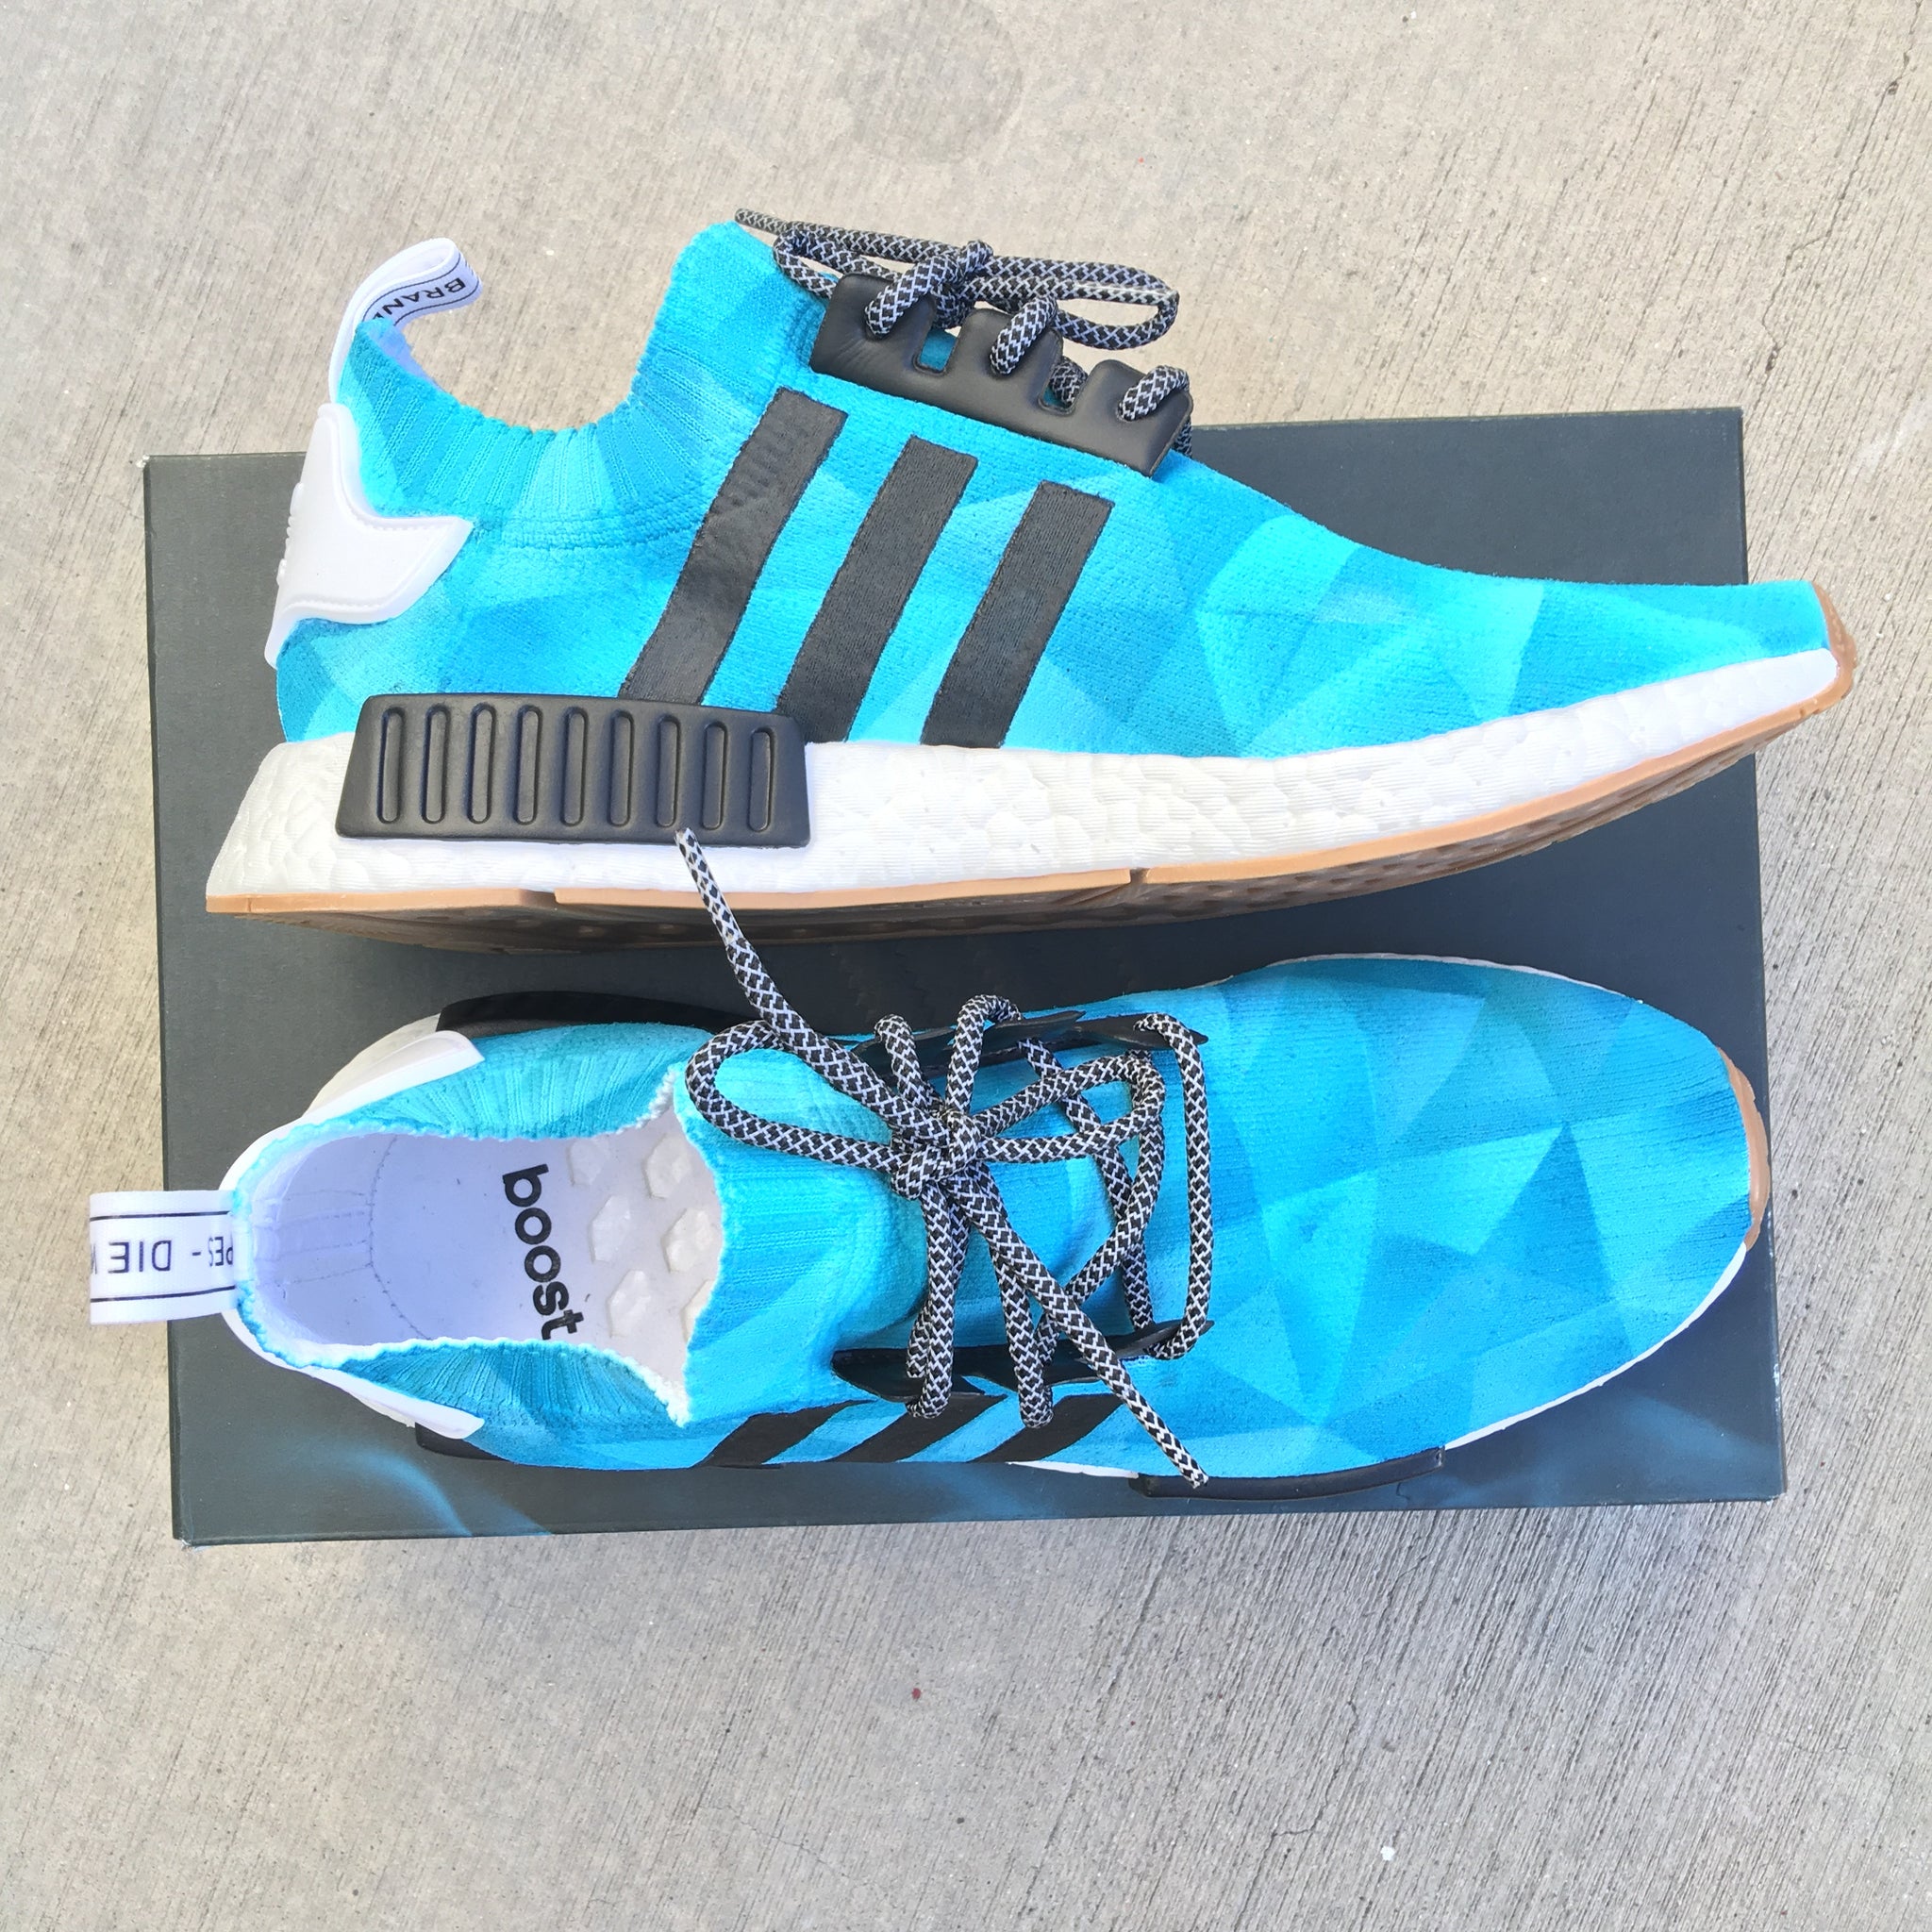 Custom Hand Painted Made To Order Adidas NMD_R1 Shoes (Men/Women)